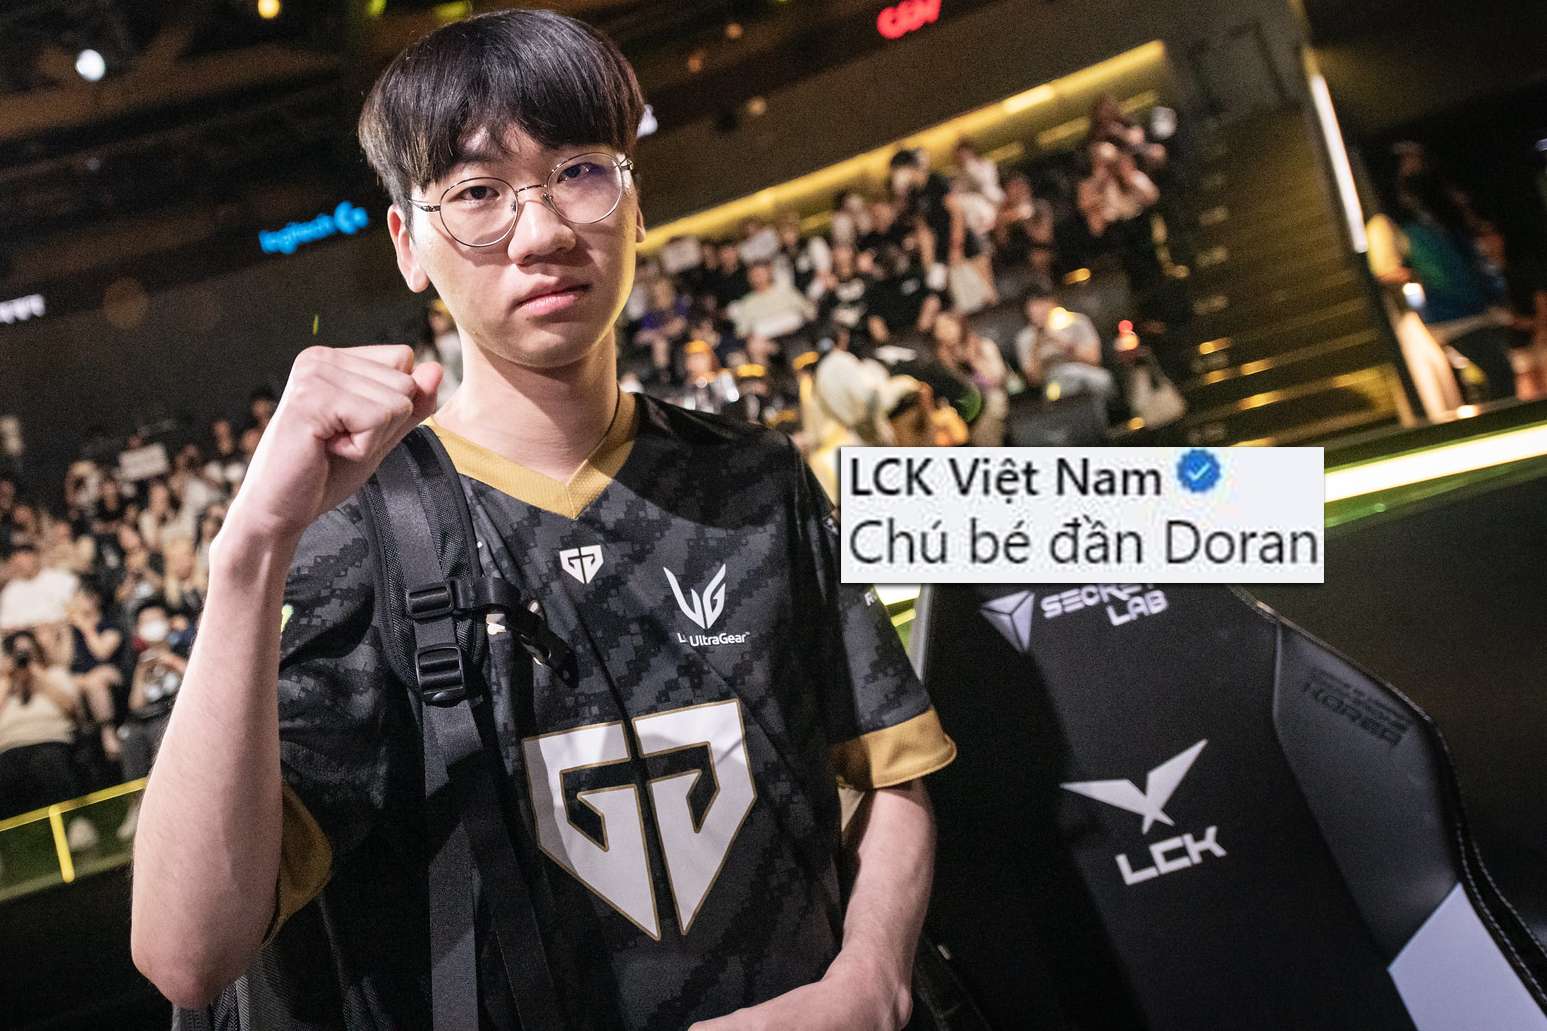 The comments of the Vietnam LCK fanpage have made quite a lot of League of Legends gamers angry.